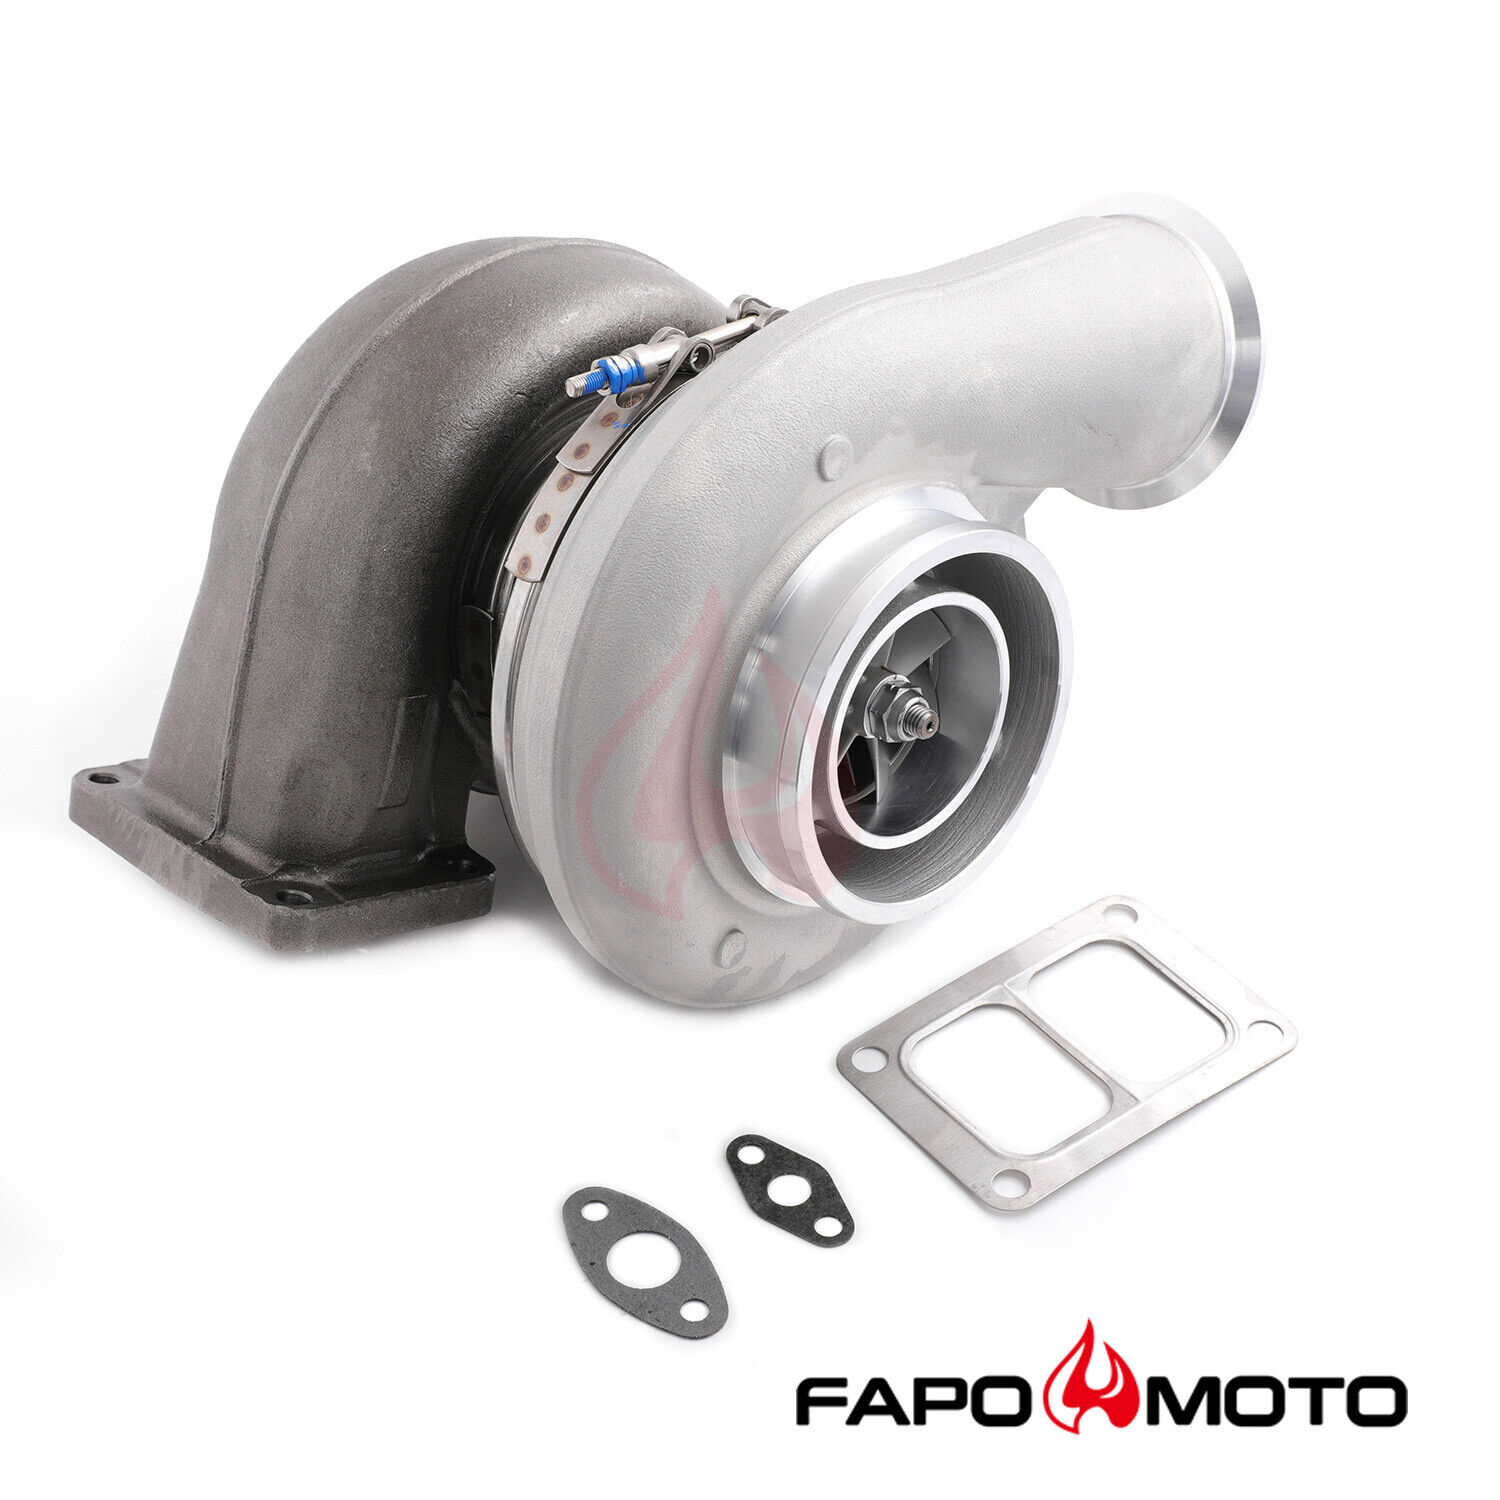 FAPO 1000HP S400SX4-75 S475 Turbo T6 Twin Scroll 1.32A/R 171702 Turbo Charger